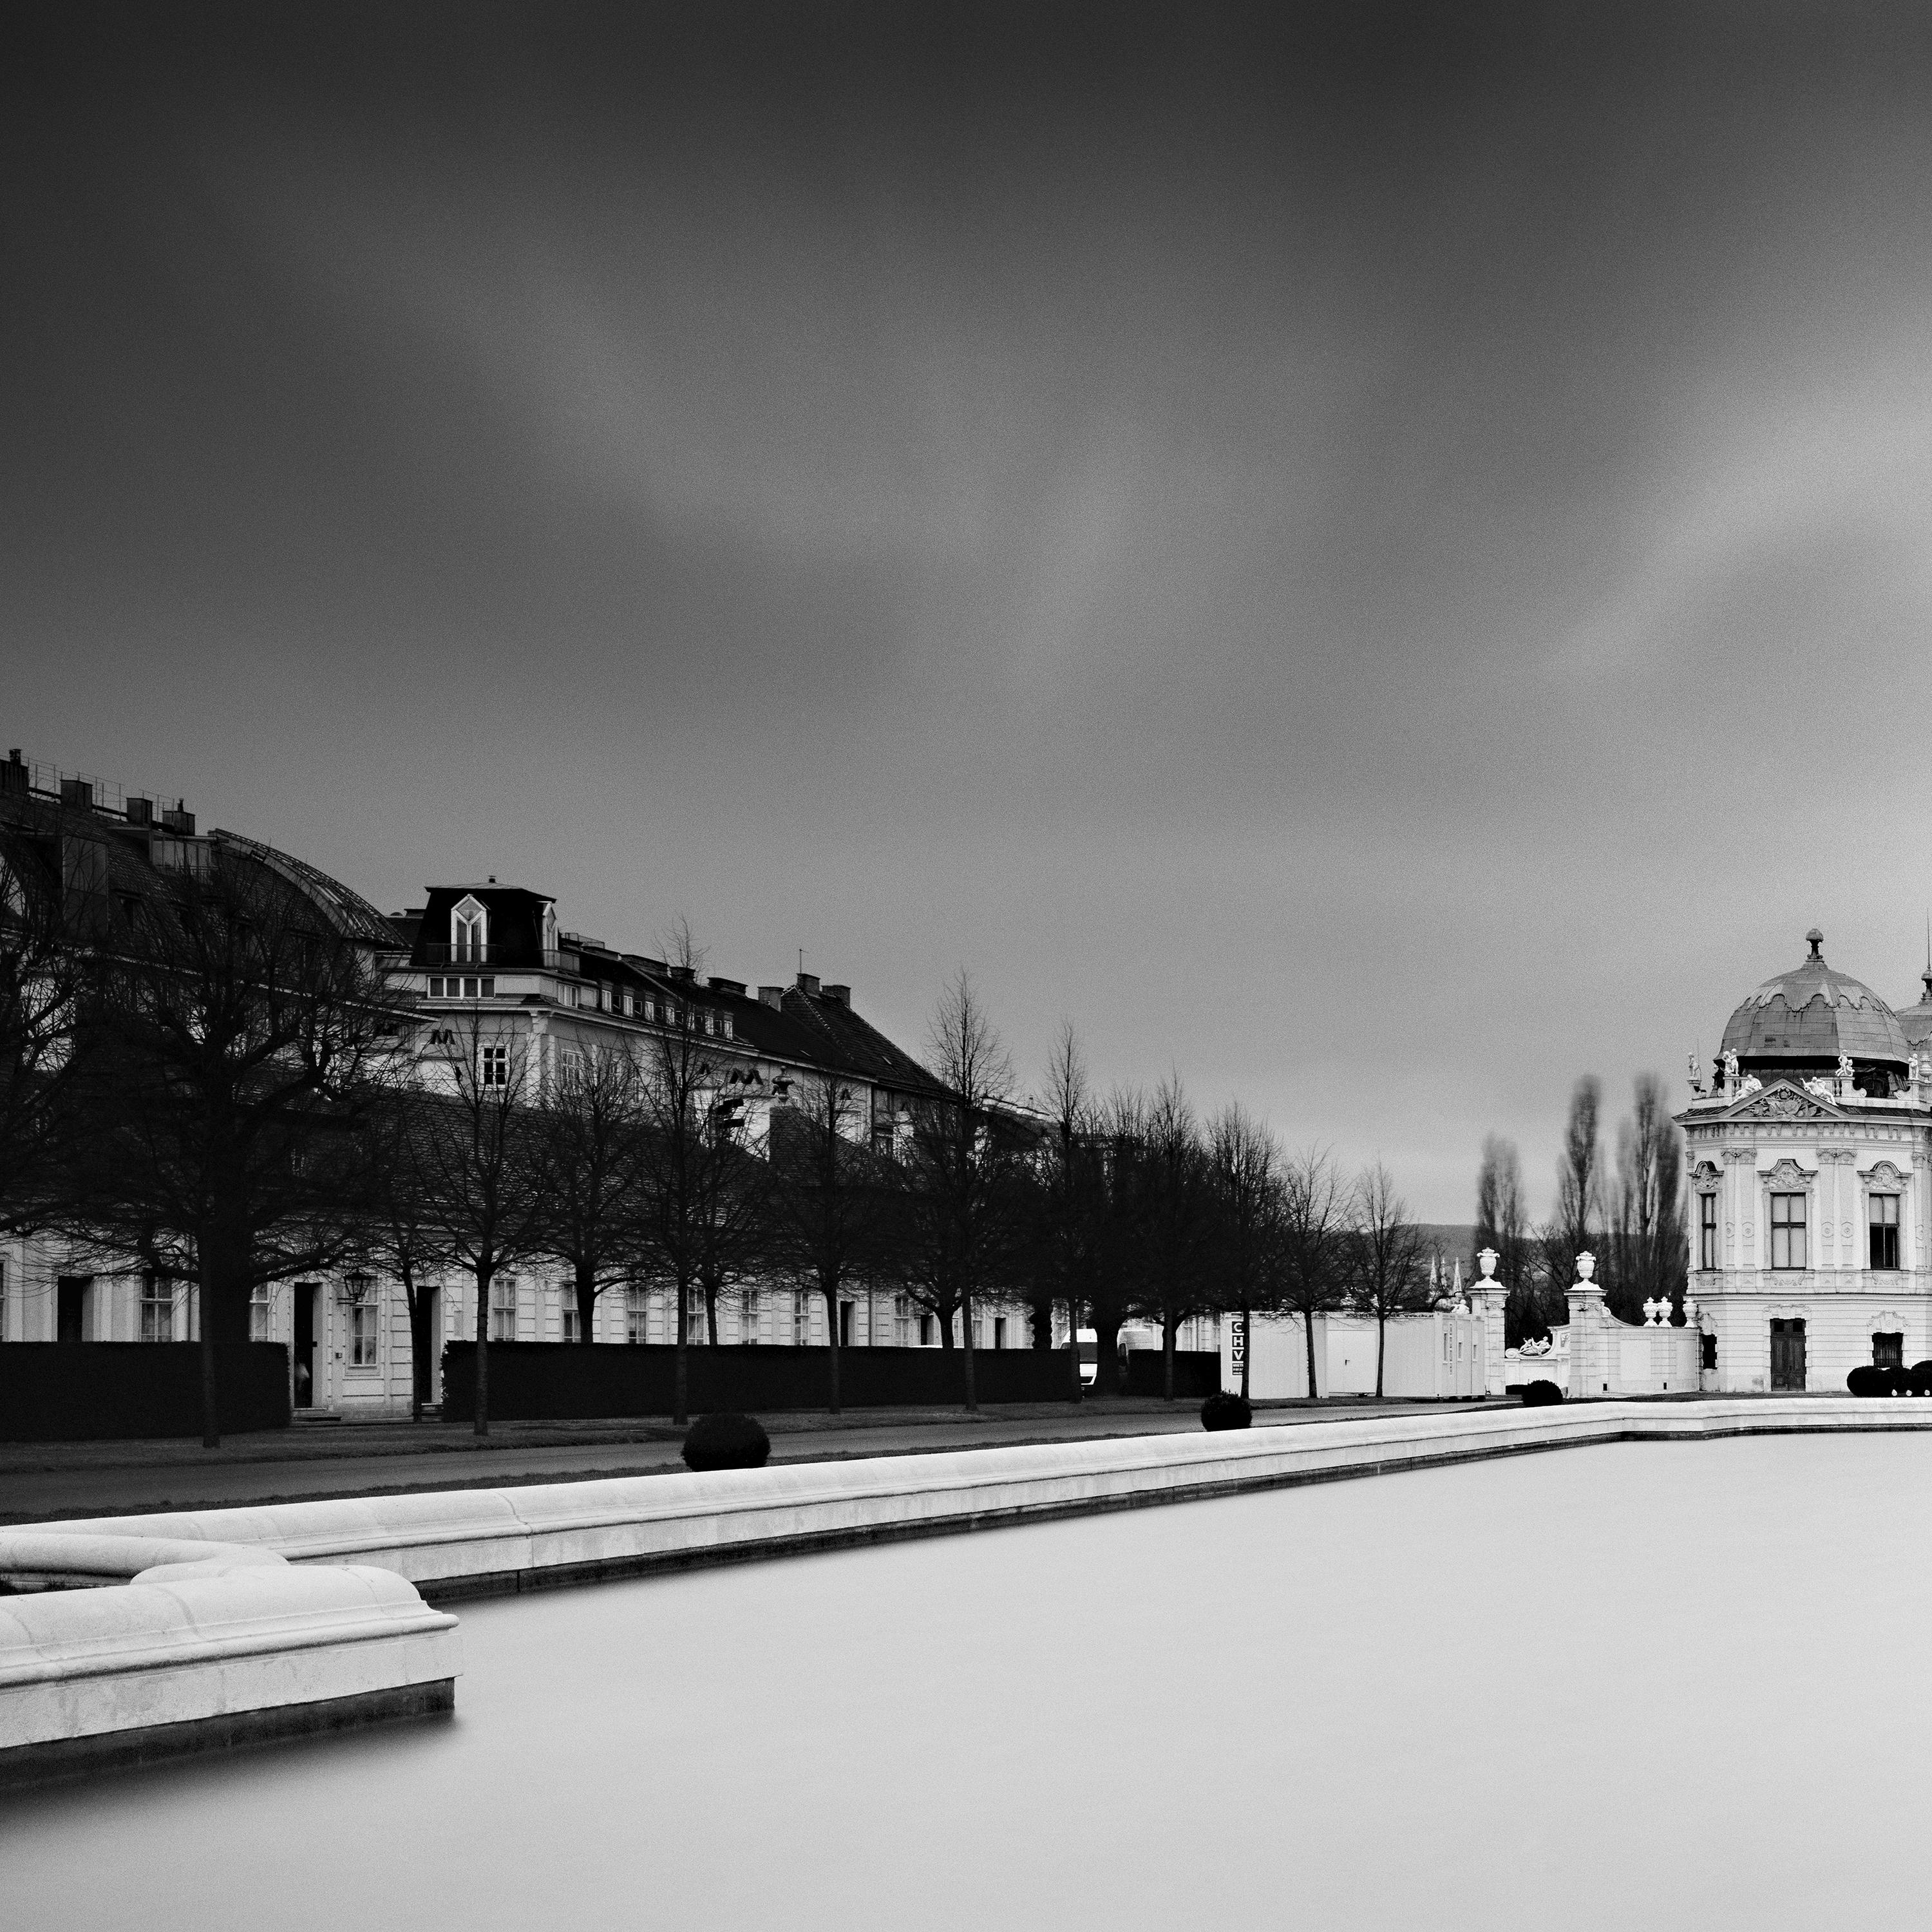 Black and White Fine Art landscape photography. Belvedere palace with water fountain during a storm, Vienna, Austria. Archival pigment ink print, edition of 9. Signed, titled, dated and numbered by artist. Certificate of authenticity included.